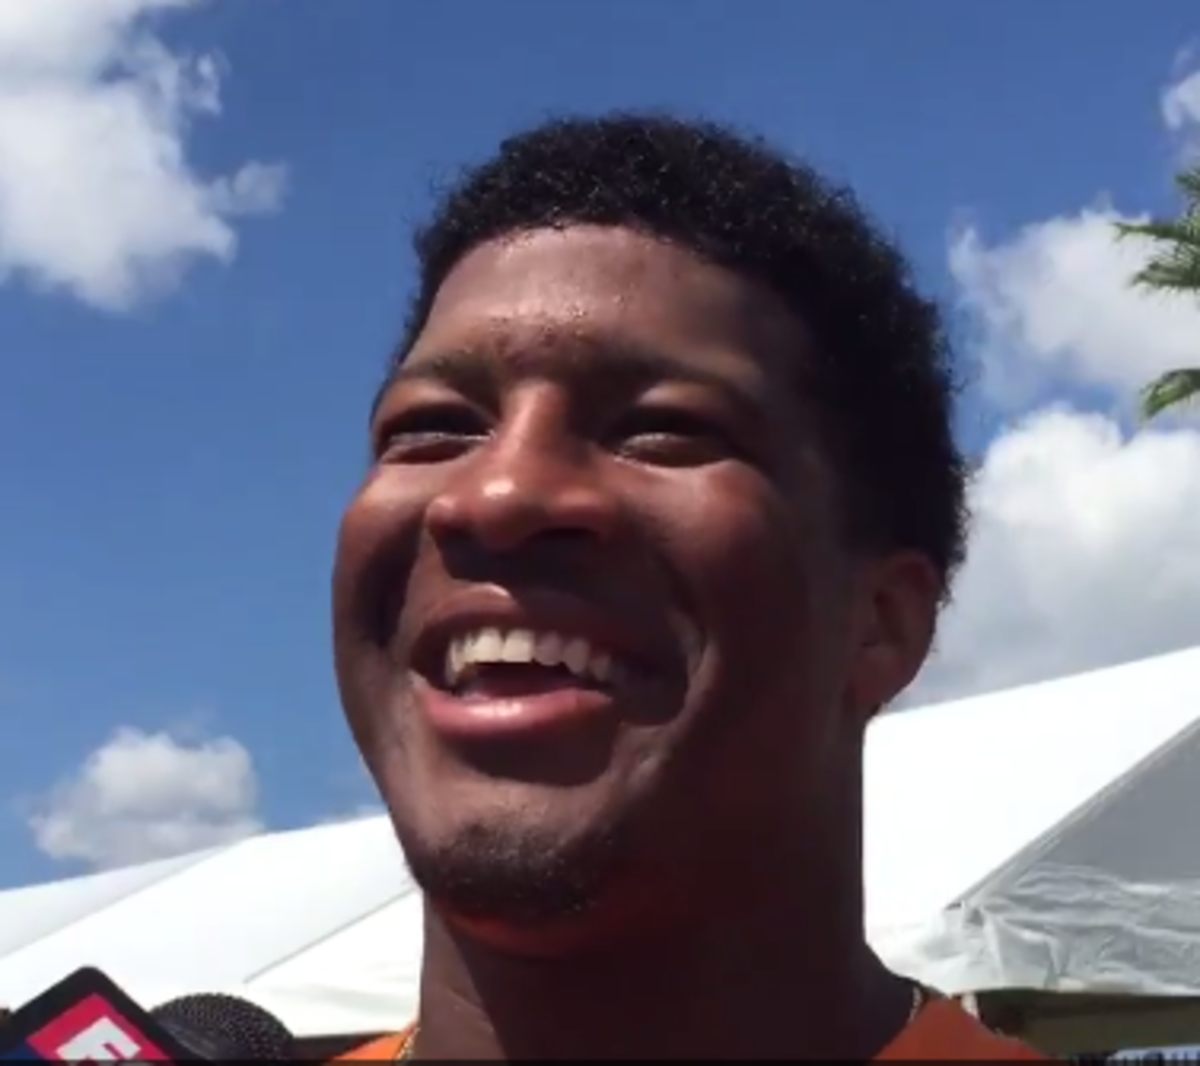 Jameis Winston laughs during an interview.